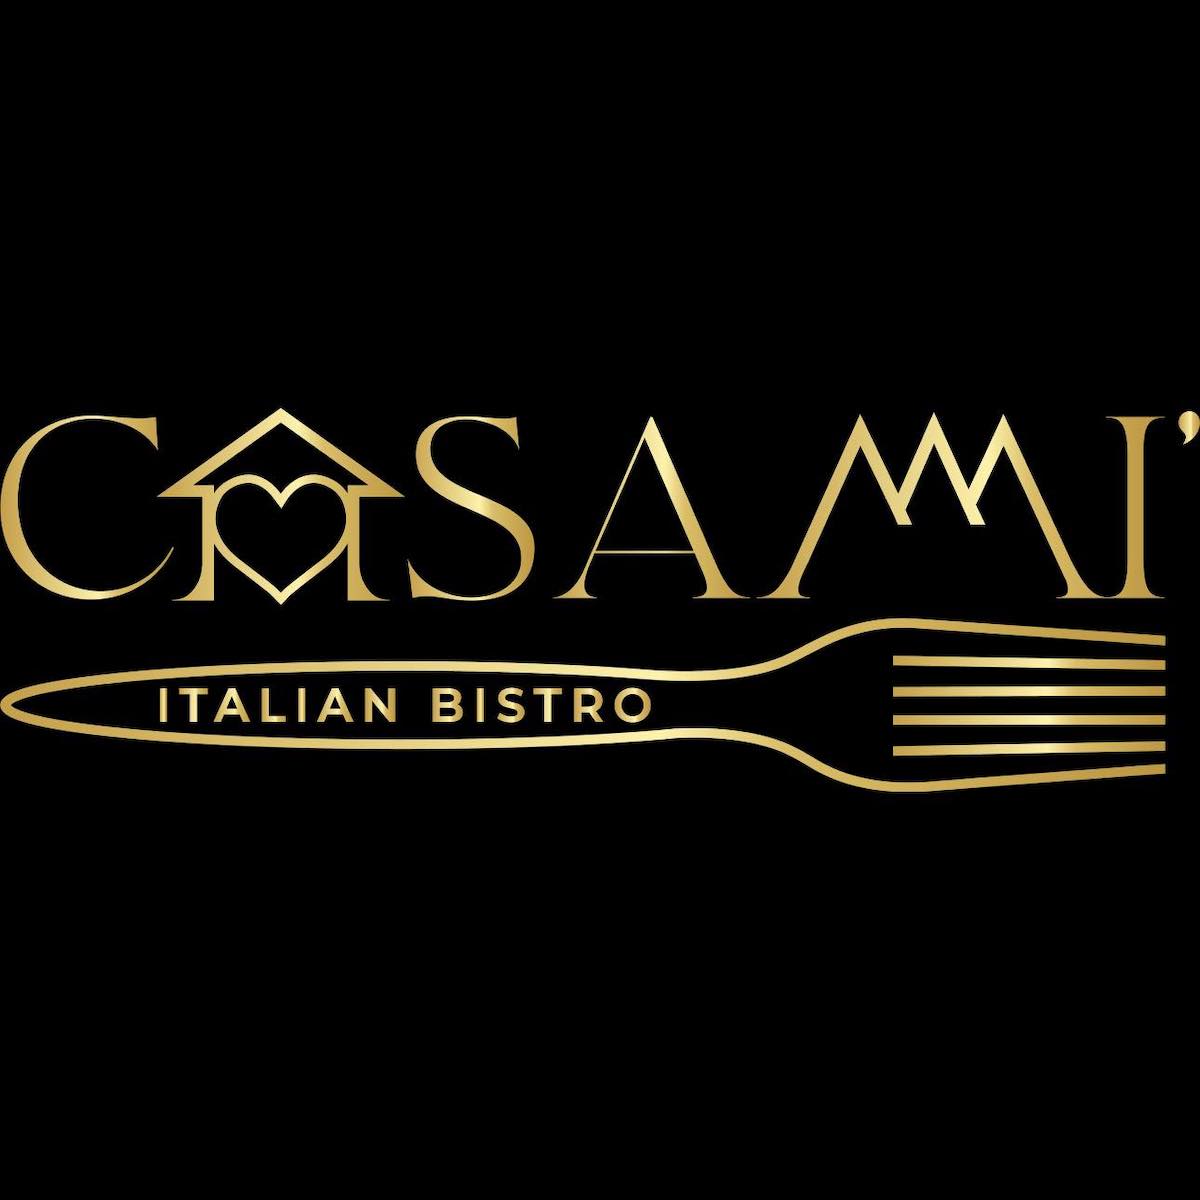 Local Chef Couple Appears to Be Opening a New Italian Restaurant